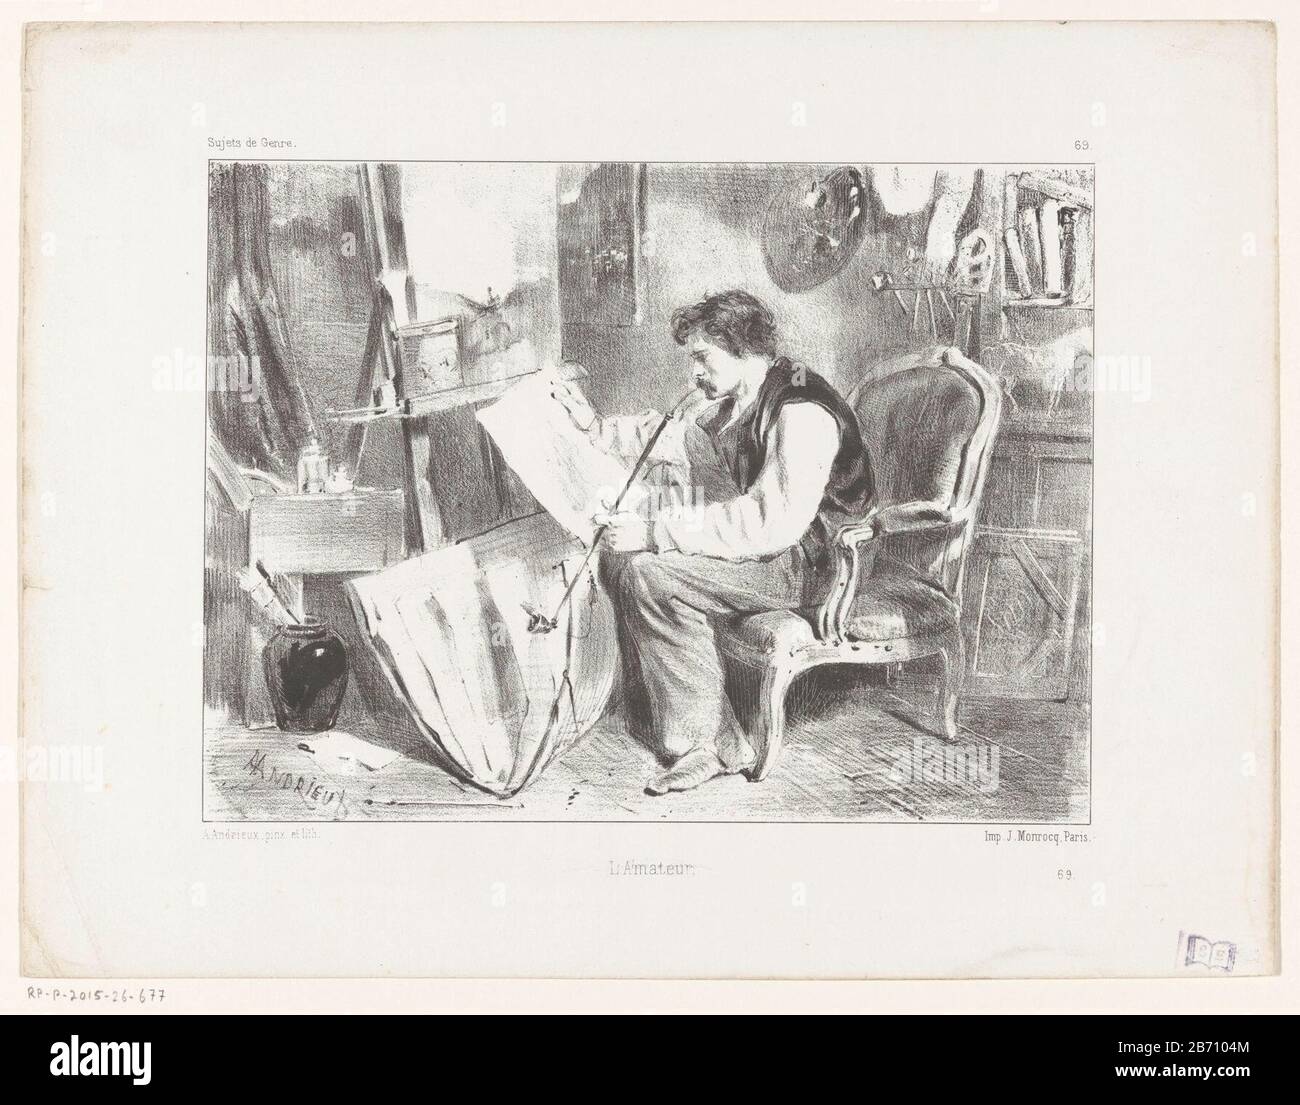 Kunstenaar bekijkt prenten in zijn atelier L'amateur (titel op object) Genretaferelen (serietitel) Sujets de Genre (serietitel op object) The artist sitting on a chair in his studio and viewing a picture or drawing derived from a portfolio that stands for him, meanwhile he is smoking a long pipe . Manufacturer : printmaker Alfred Louis Andrieux (listed property) to painting by Alfred Louis Andrieux (listed building) printer: Jean Noël Monrocq (listed property) Place manufacture: Paris Date: 1889 - 1945 Physical features: lithography material: paper technique: lithography (technique) Dimensions Stock Photo